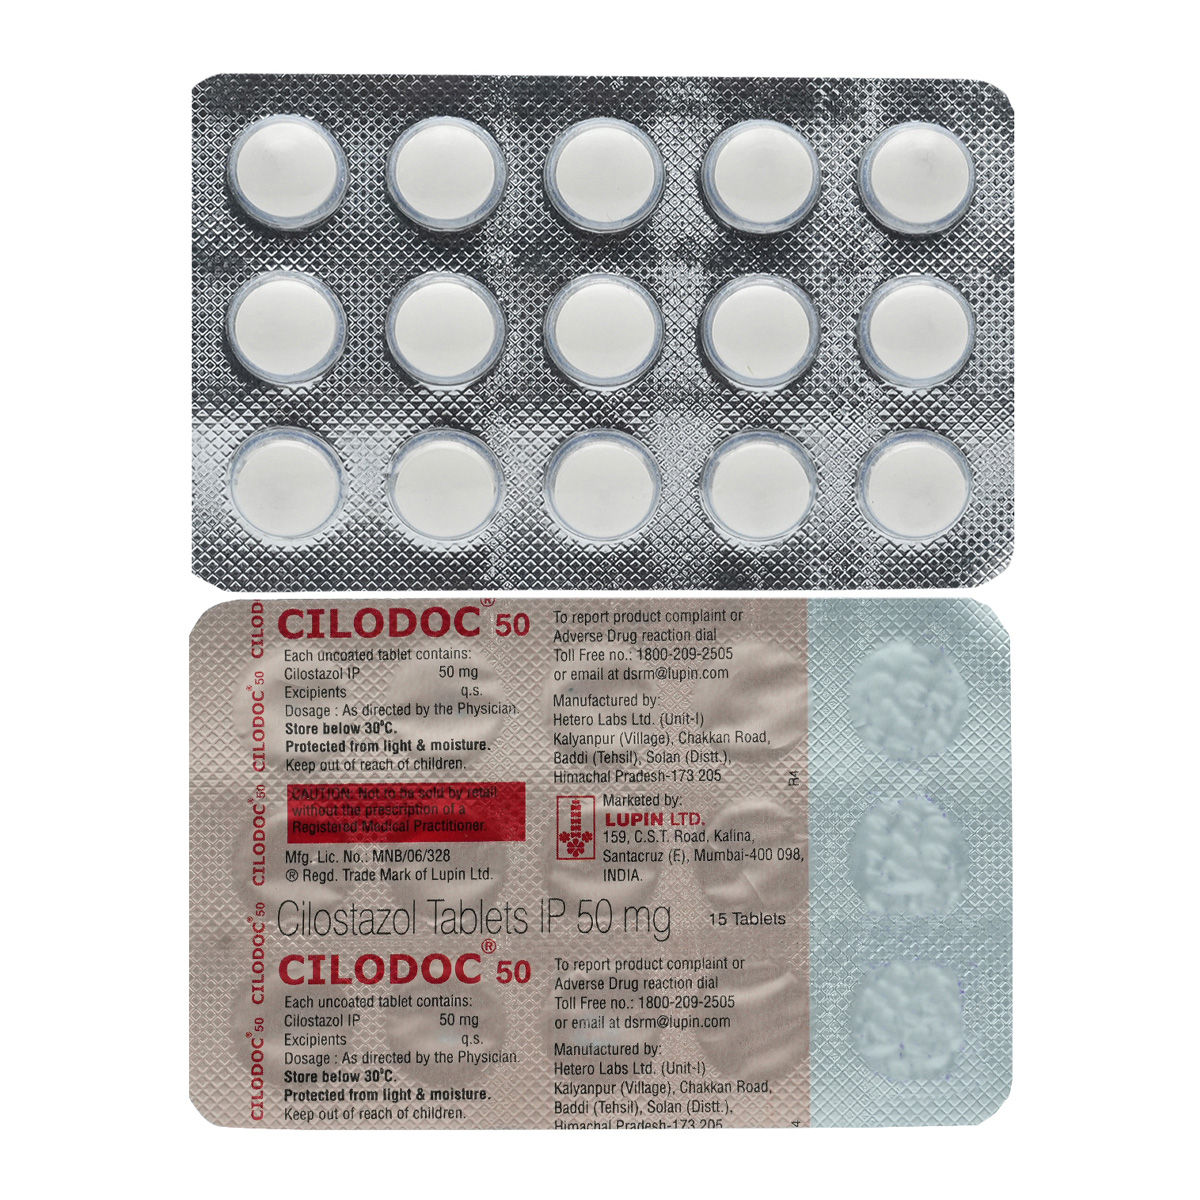 Cilodoc 50 Tablet 15's, Pack of 15 TABLETS